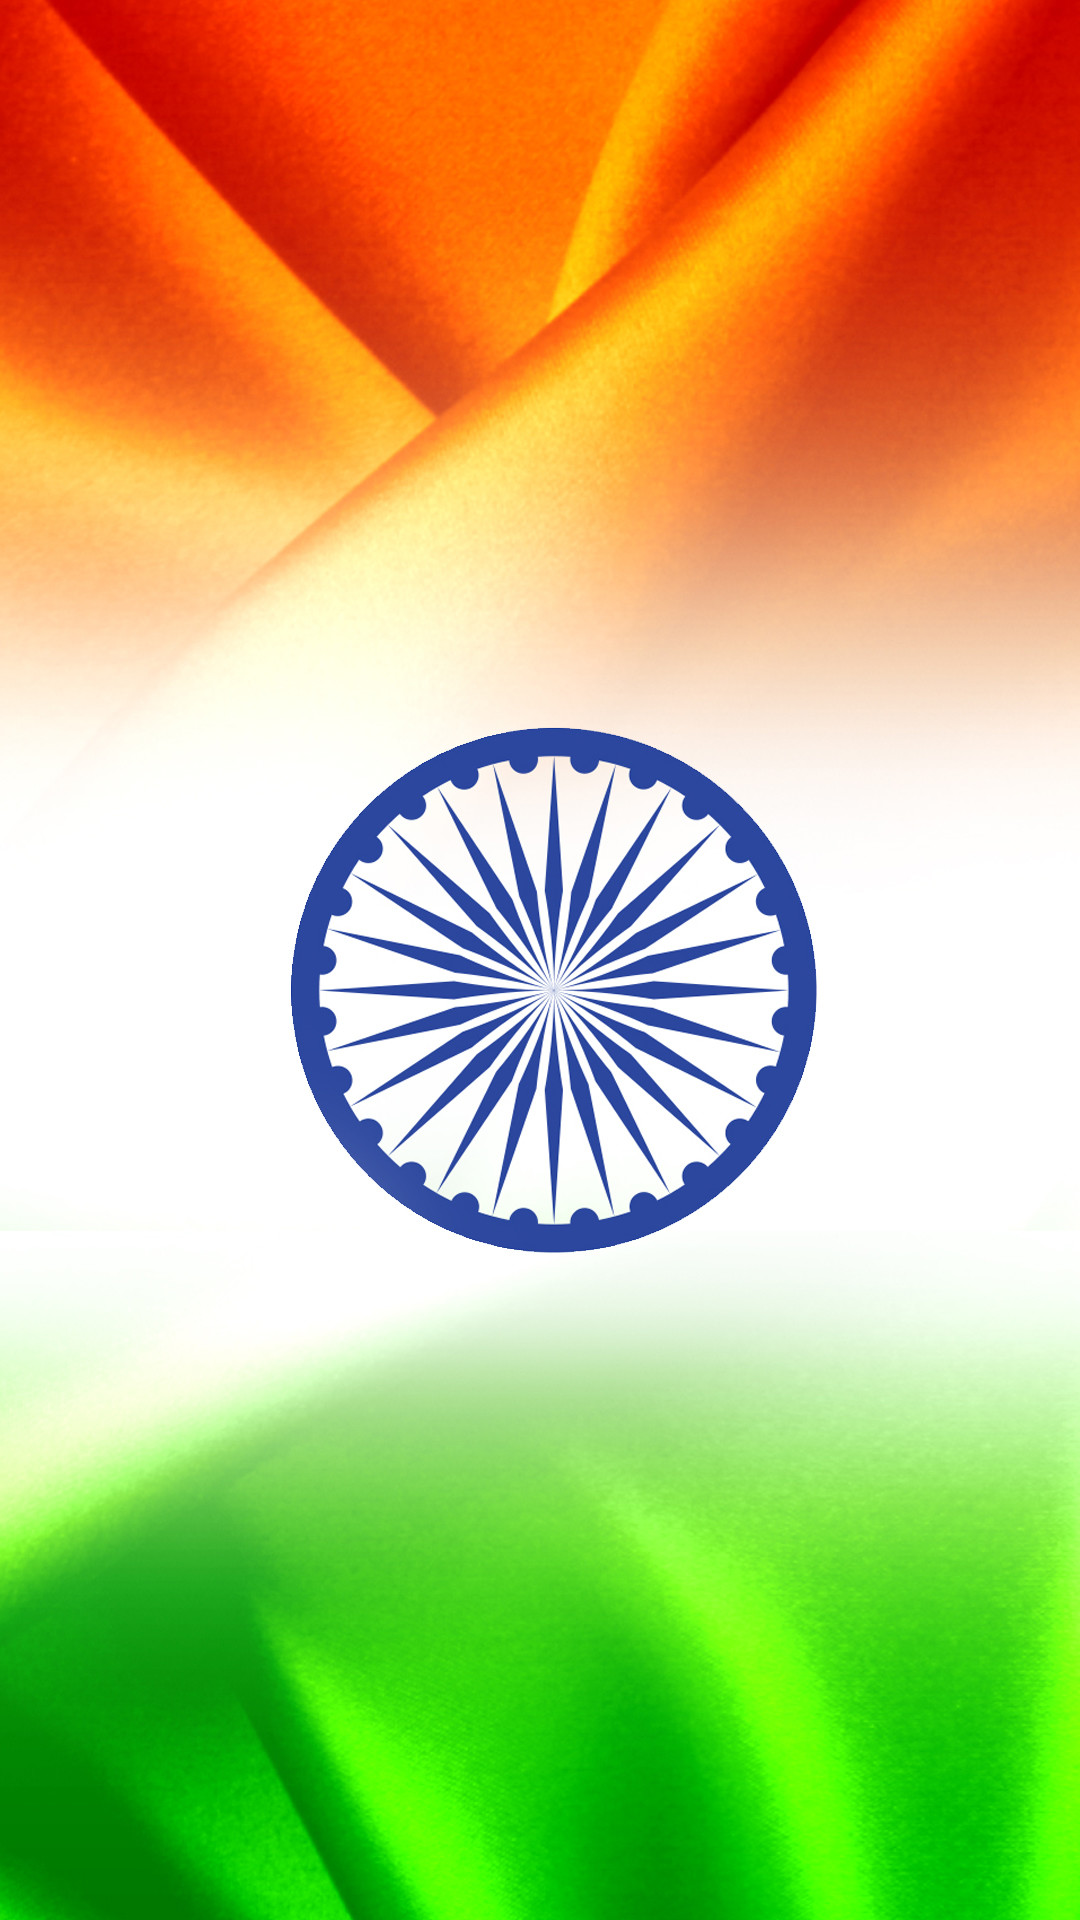 1080x1920 India Flag for Mobile Phone Wallpaper 11 of 17 - Tricolour India Flag - HD  Wallpapers for Free